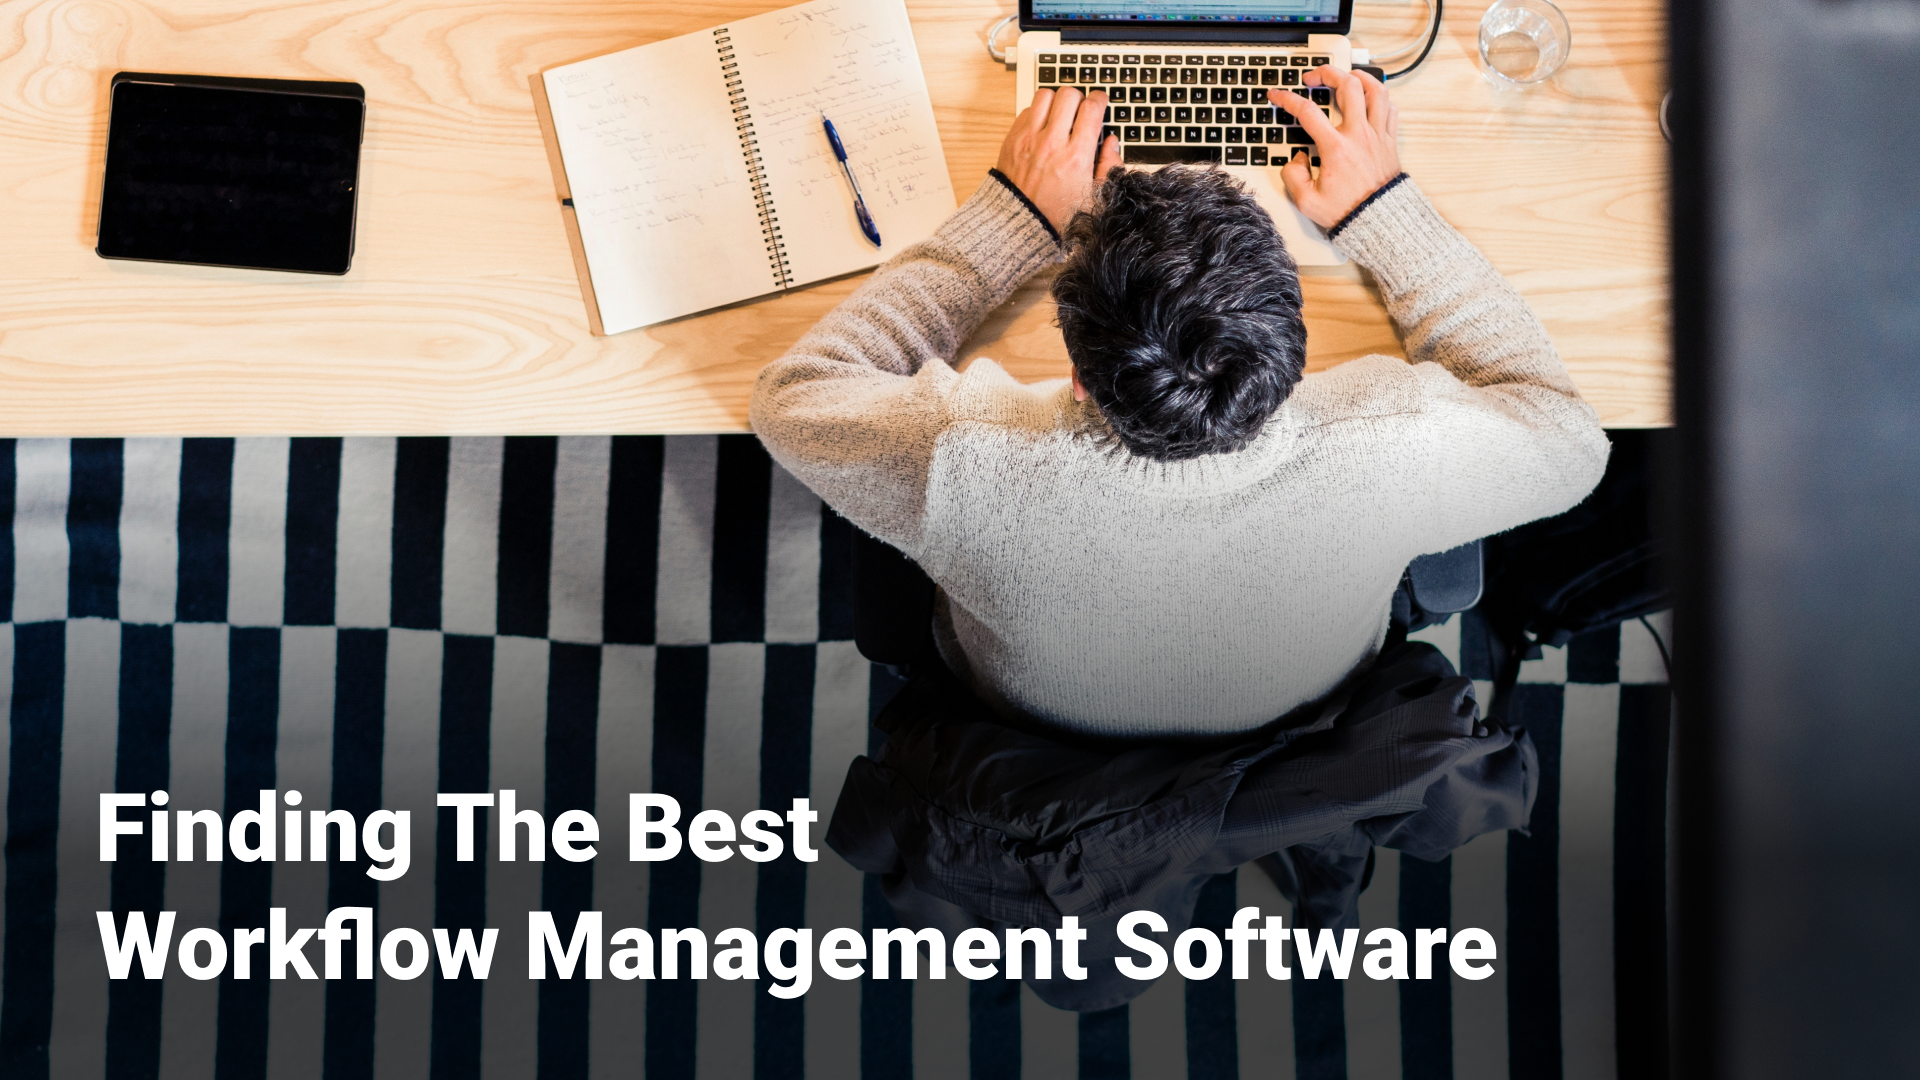 Finding the best workflow management software.